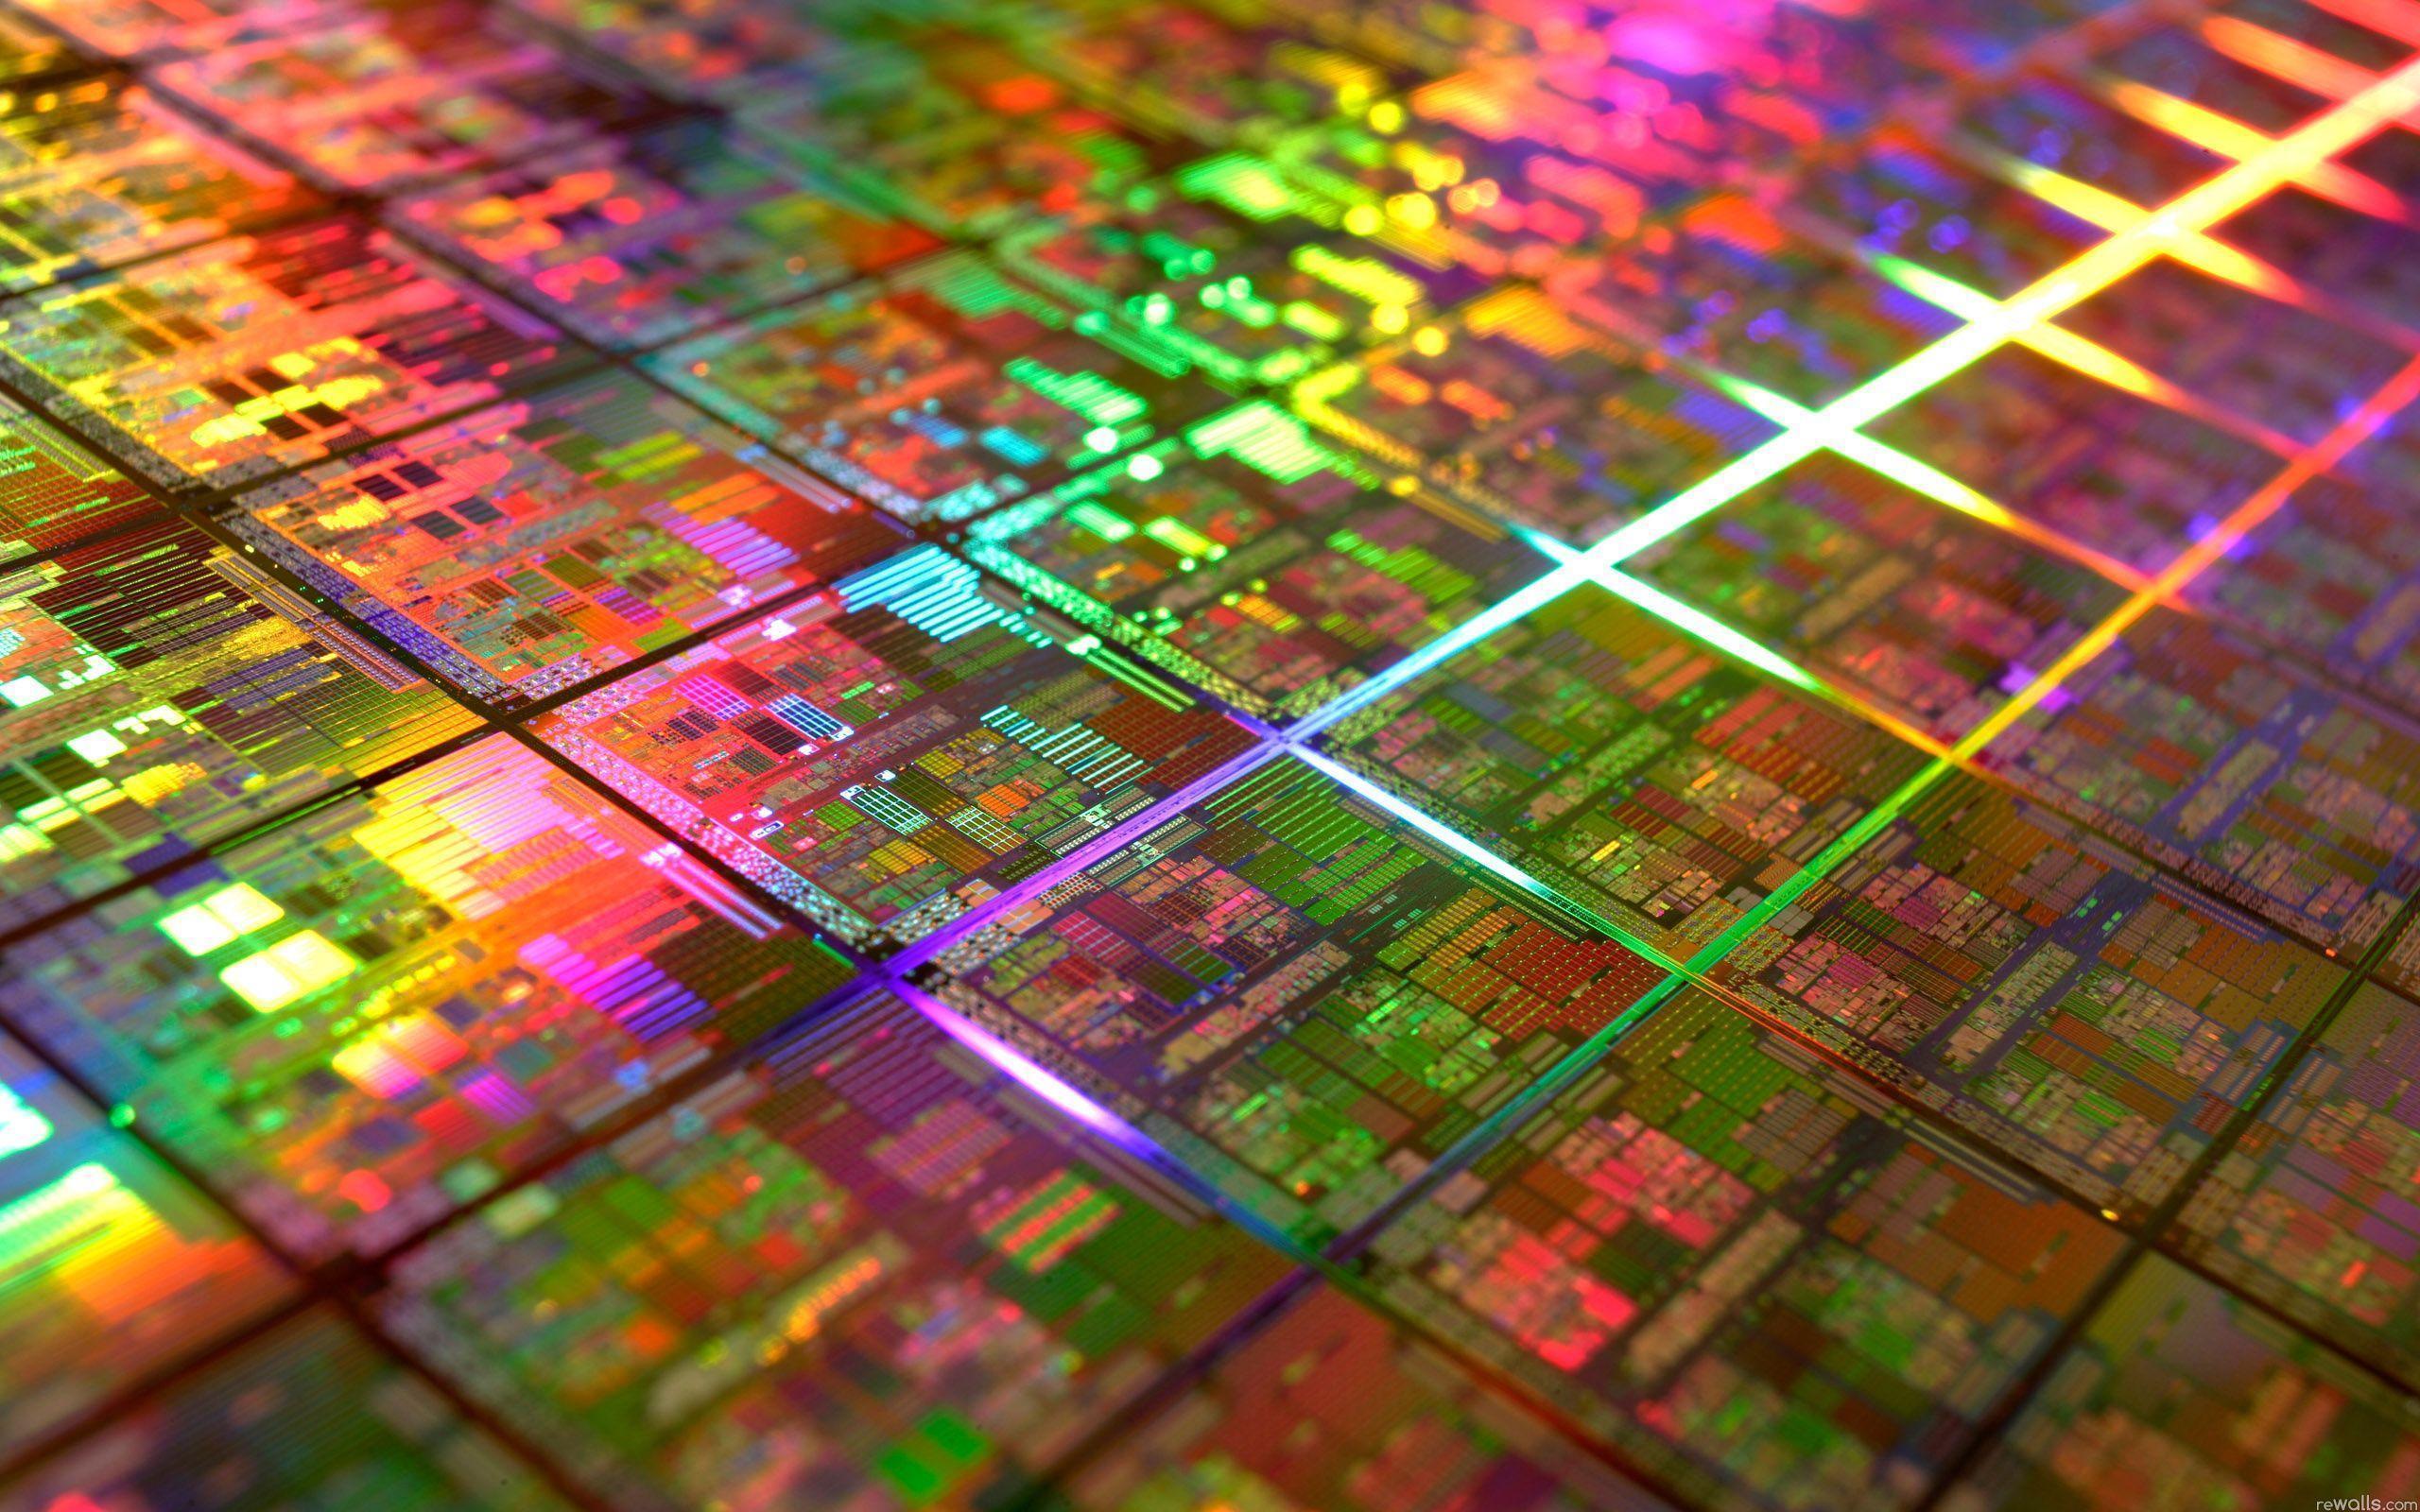 AXC78: Cpu Wallpapers, Cpu Backgrounds In High Quality, Fungyung